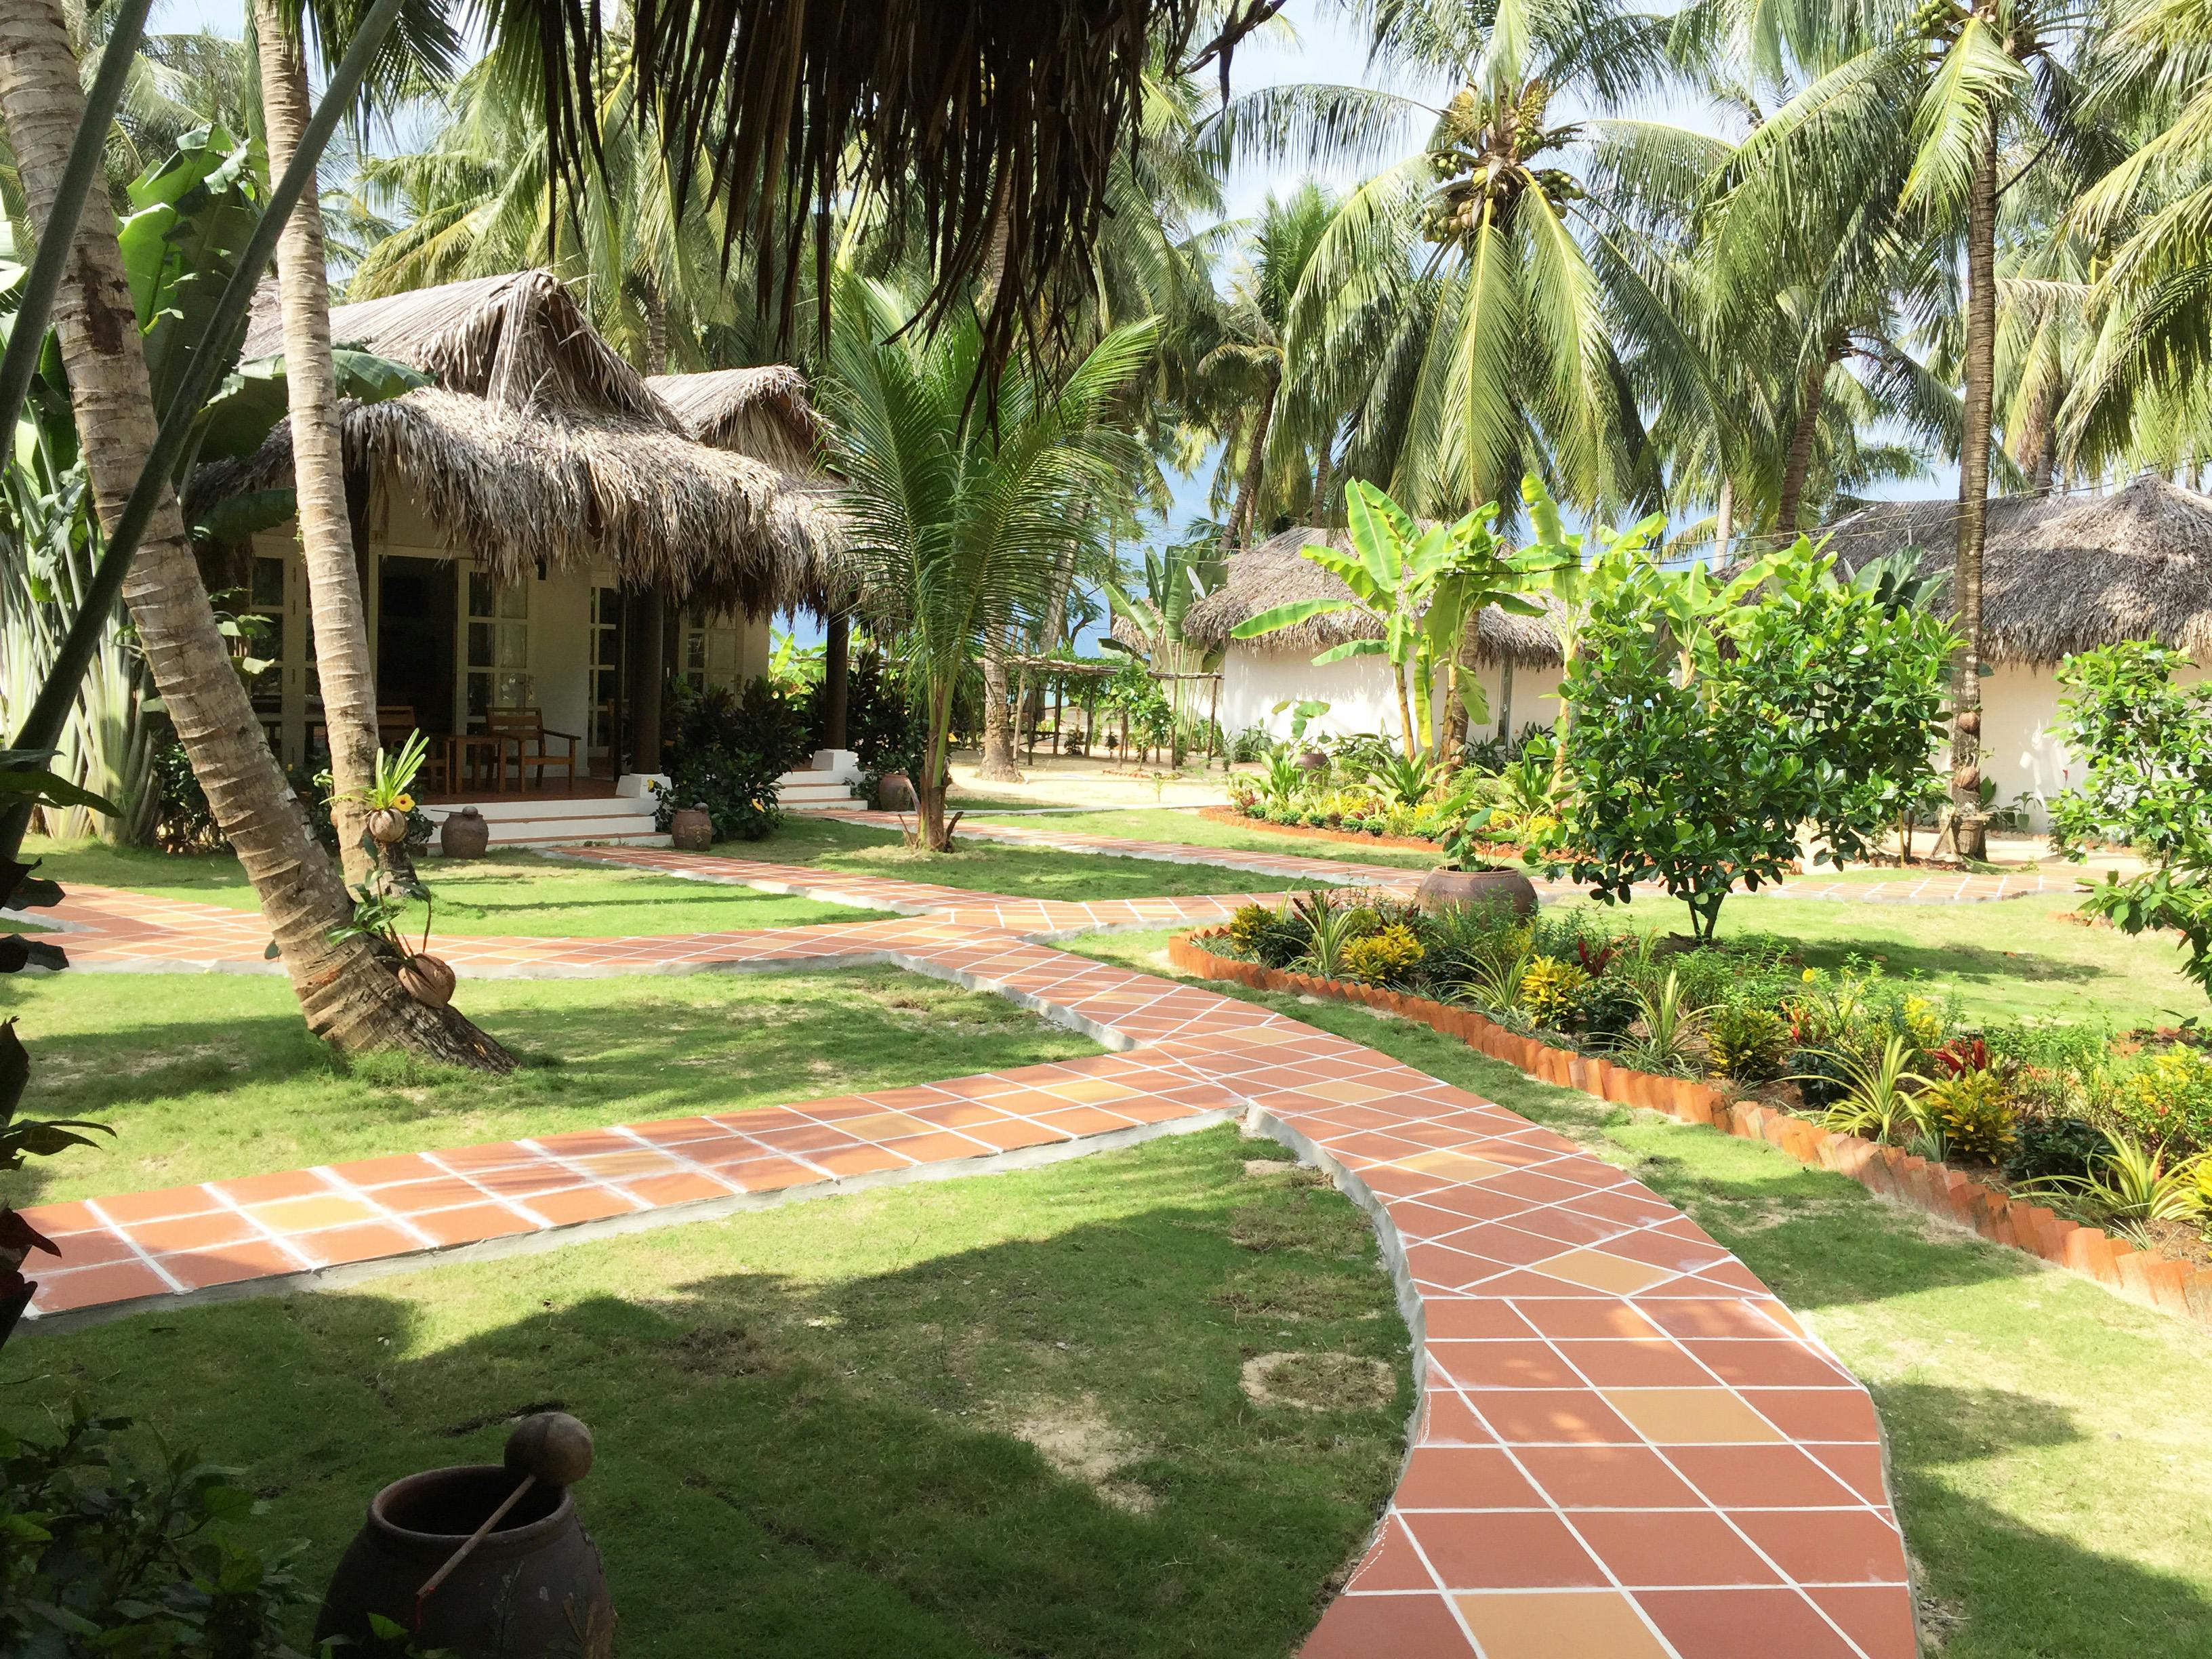 Garden Double View Pathways and Tropical Trees